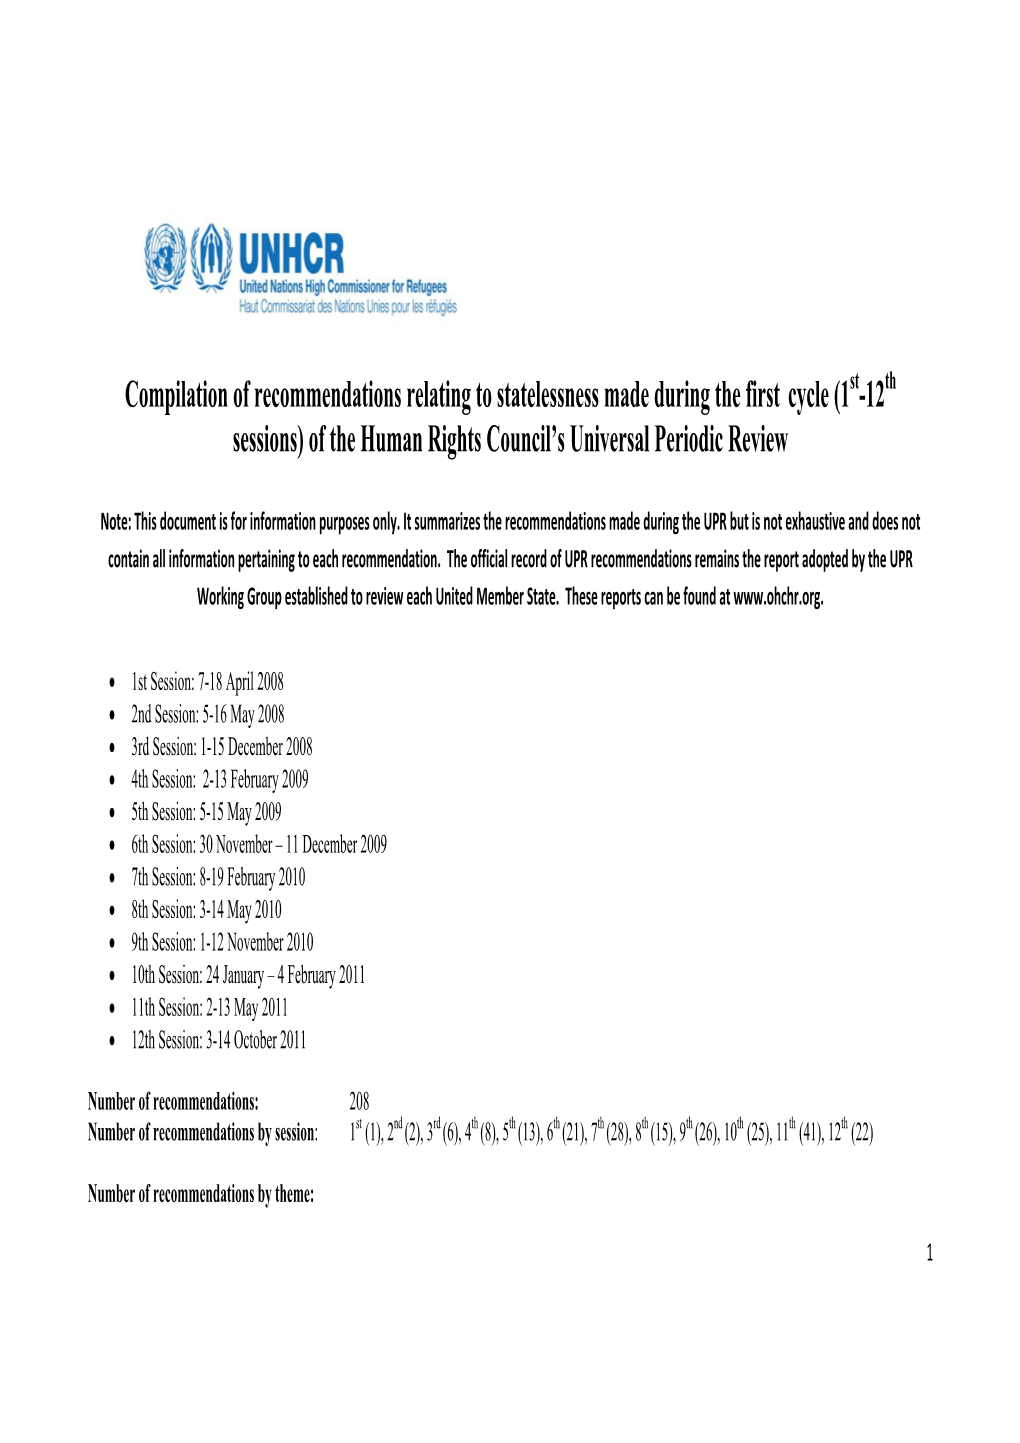 Compilation of Recommendations Relating to Statelessness Made During the First Cycle (1St-12Th Sessions) of the Human Rights Council’S Universal Periodic Review